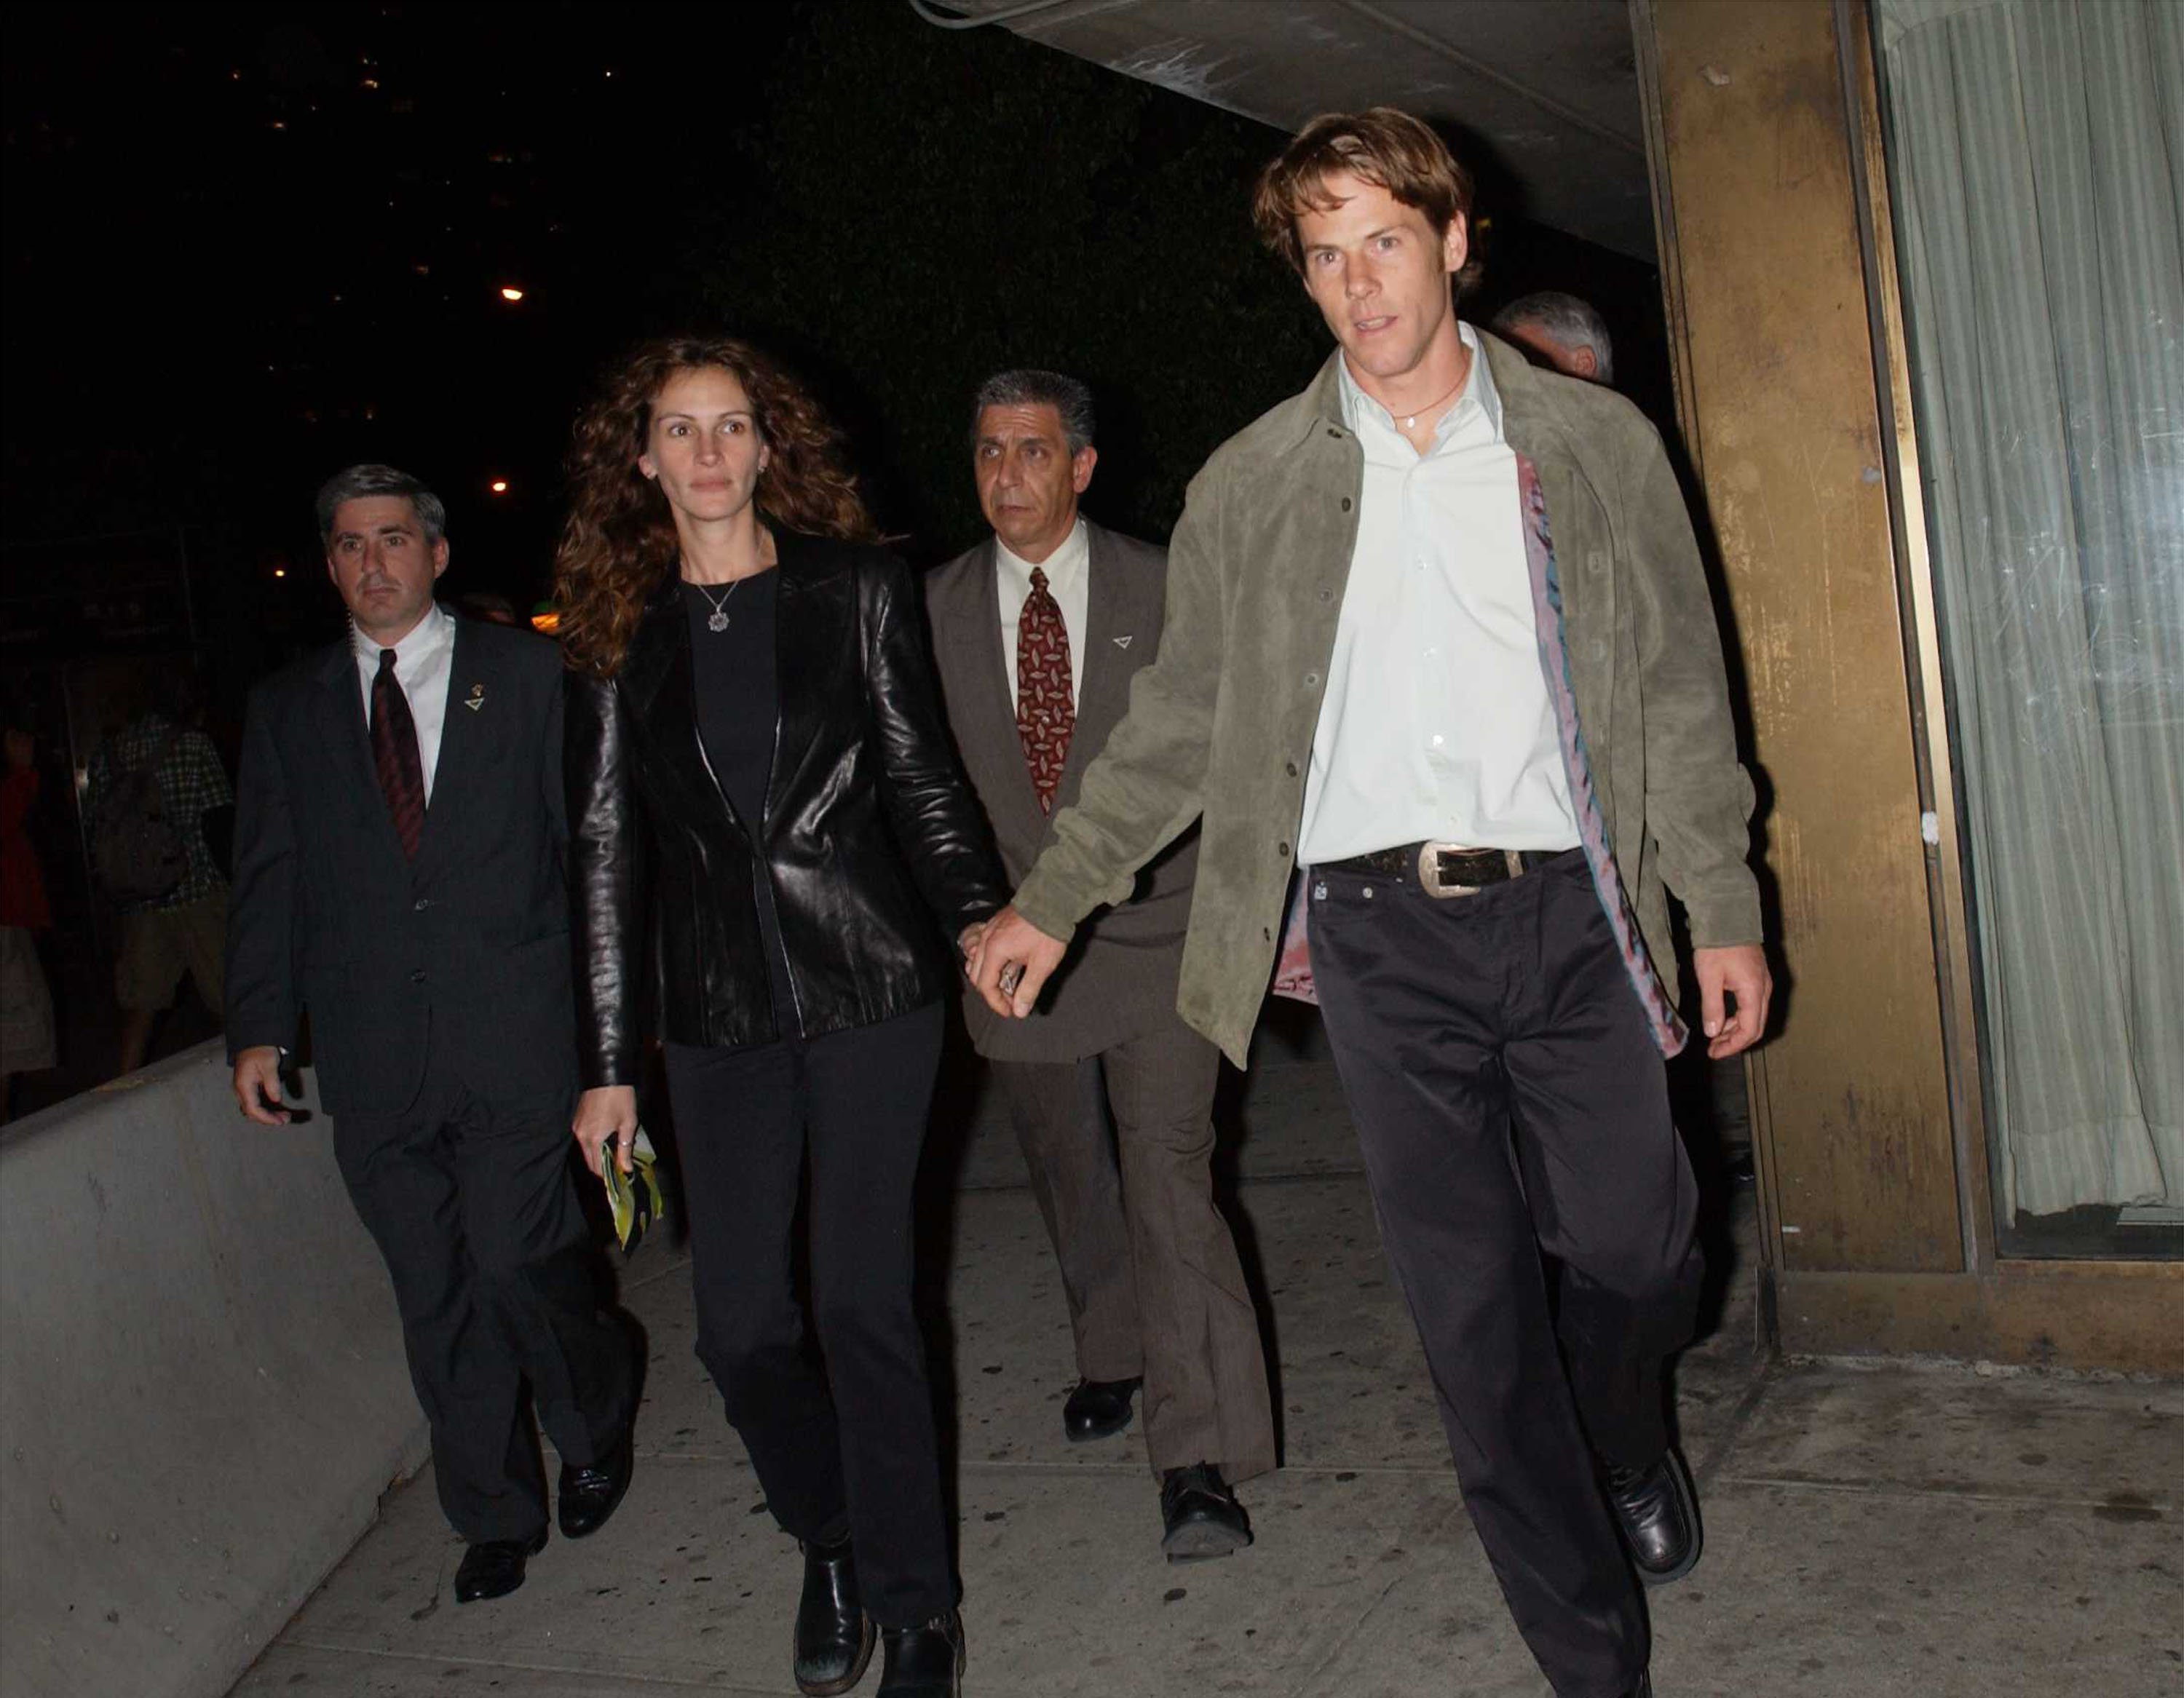 Julia Roberts and Danny Moder spotted leaving the screening of "Punch-Drunk Love" at Alice Tully Hall during the 10th Annual New York Film Festival October 5, 2002 in New York City, New York. | Source: Getty Images